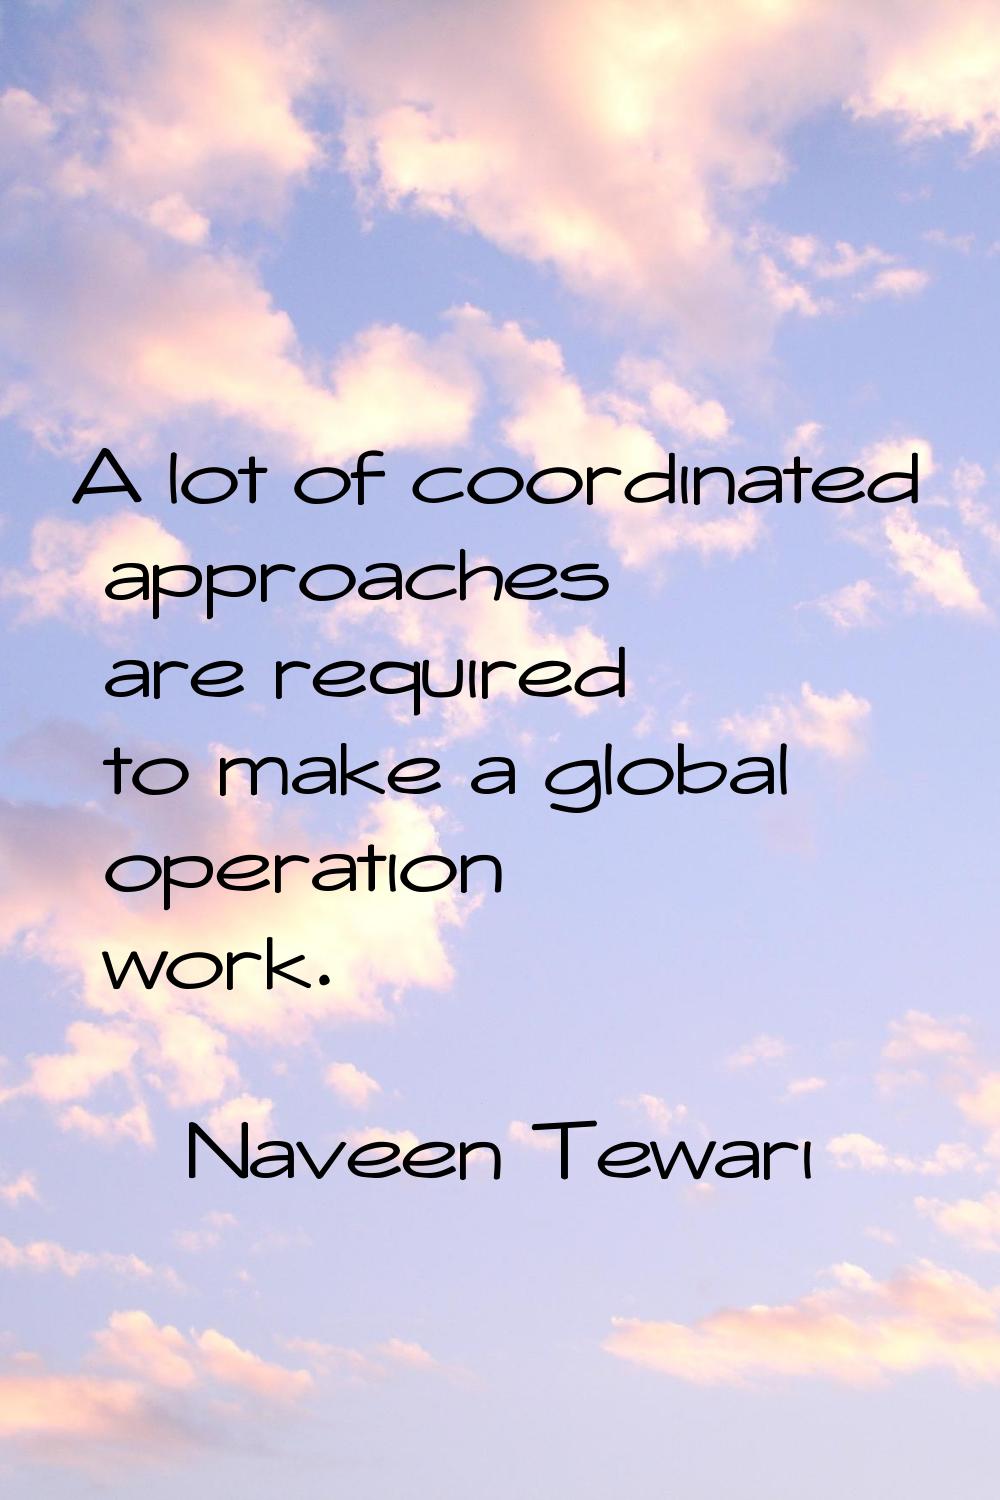 A lot of coordinated approaches are required to make a global operation work.